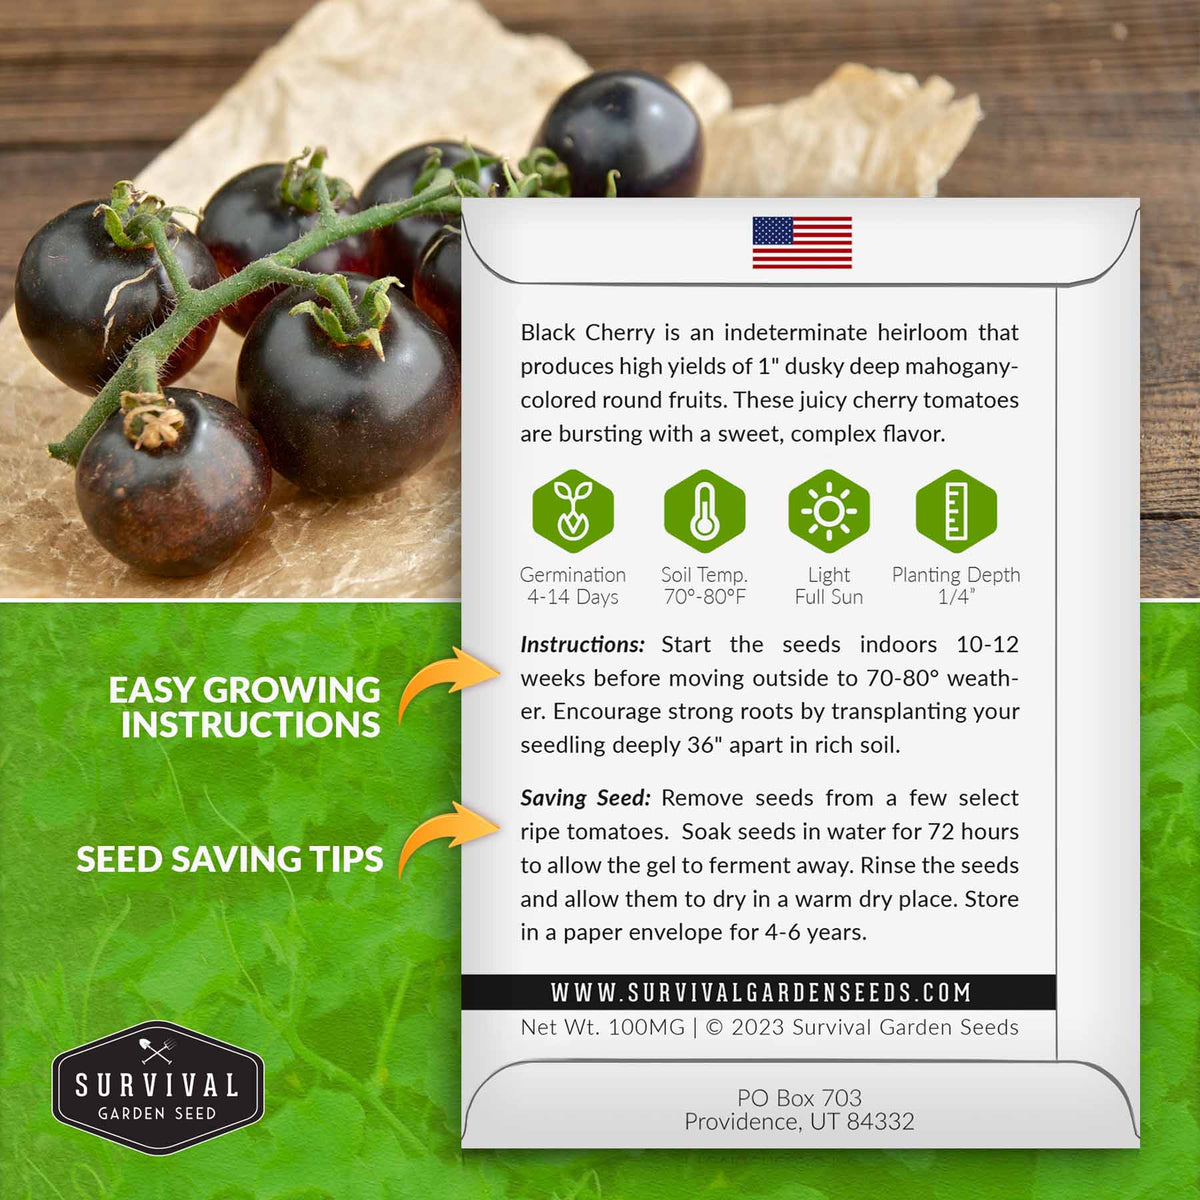 Black Cherry Tomato seed growing instructions